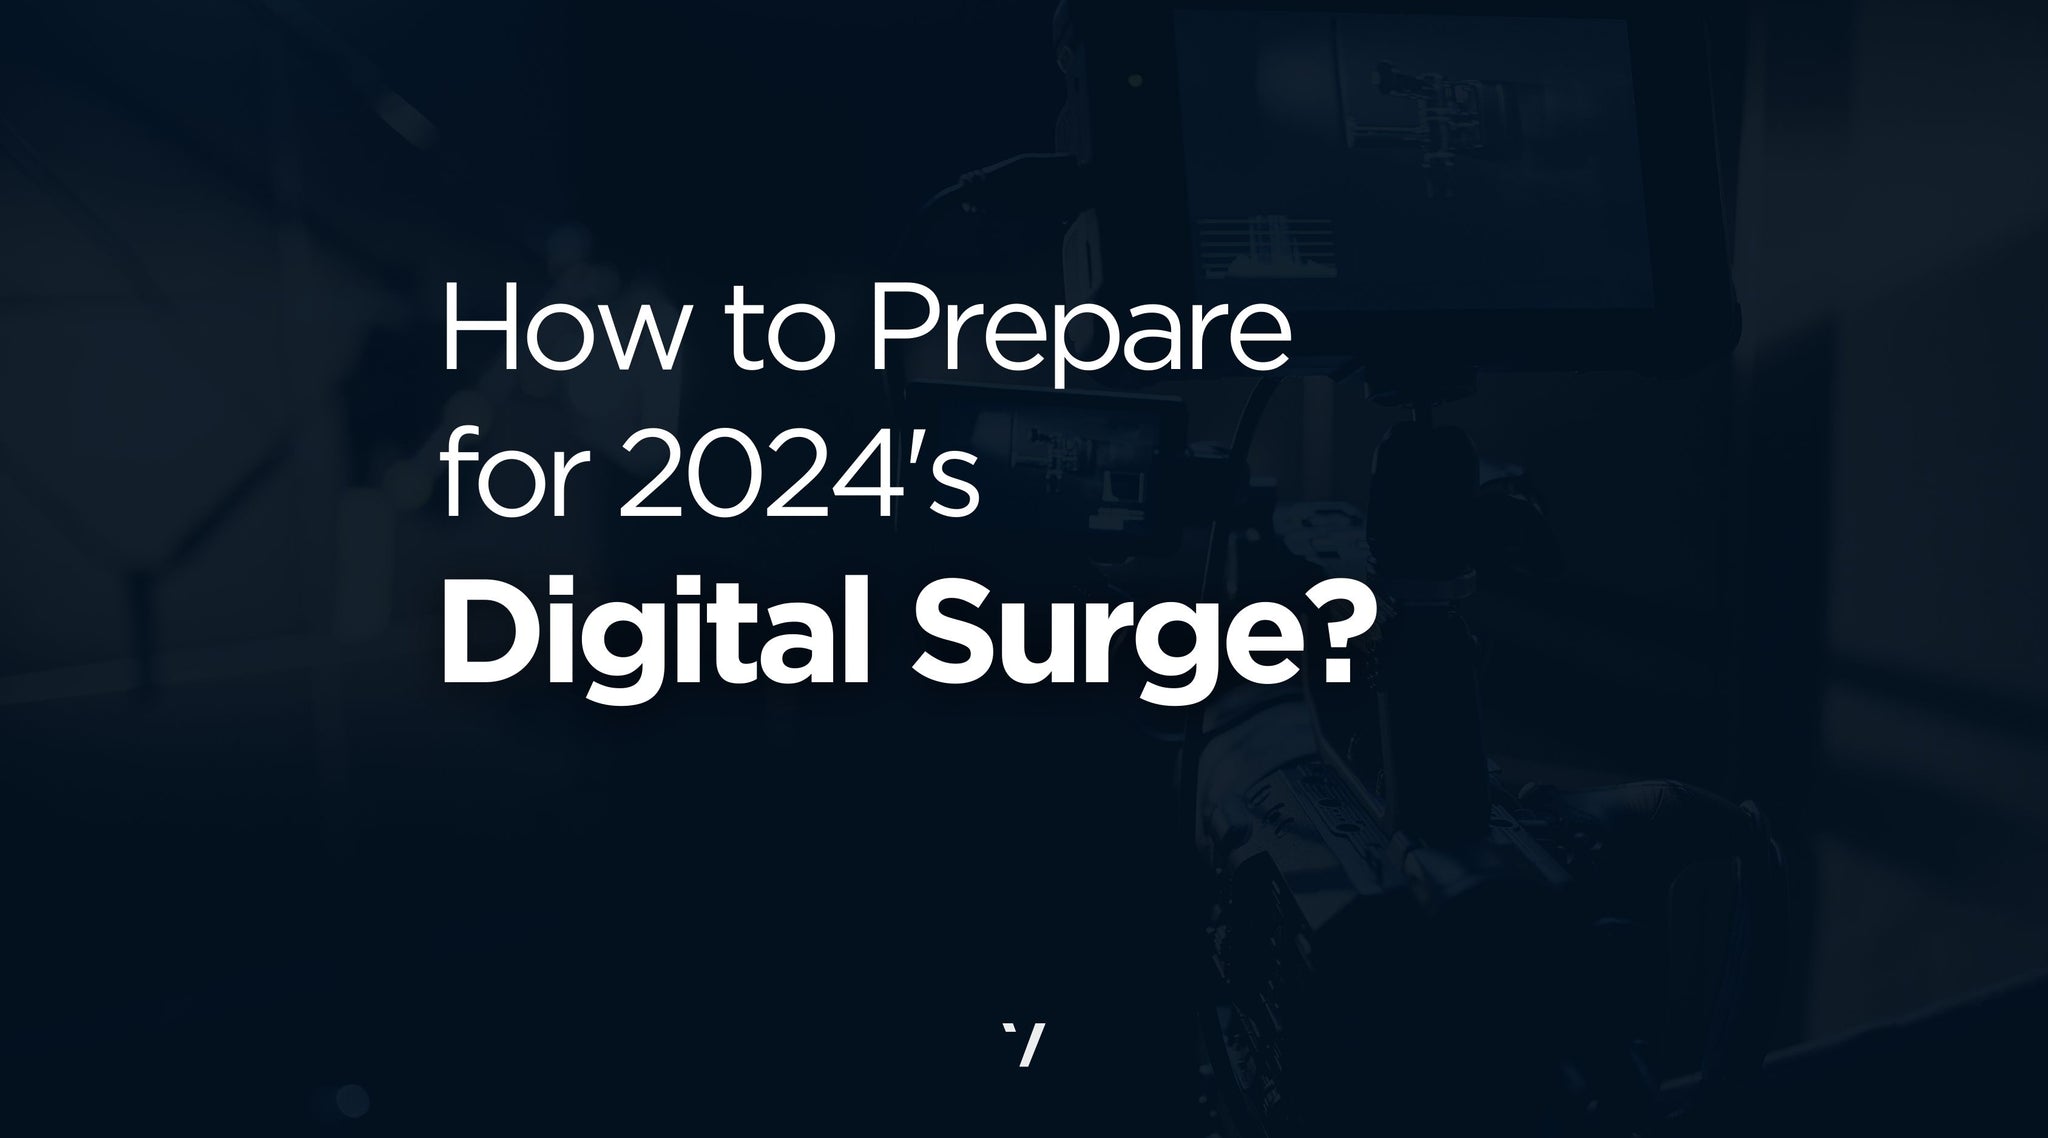 How to Prepare for 2024's Digital Surge?